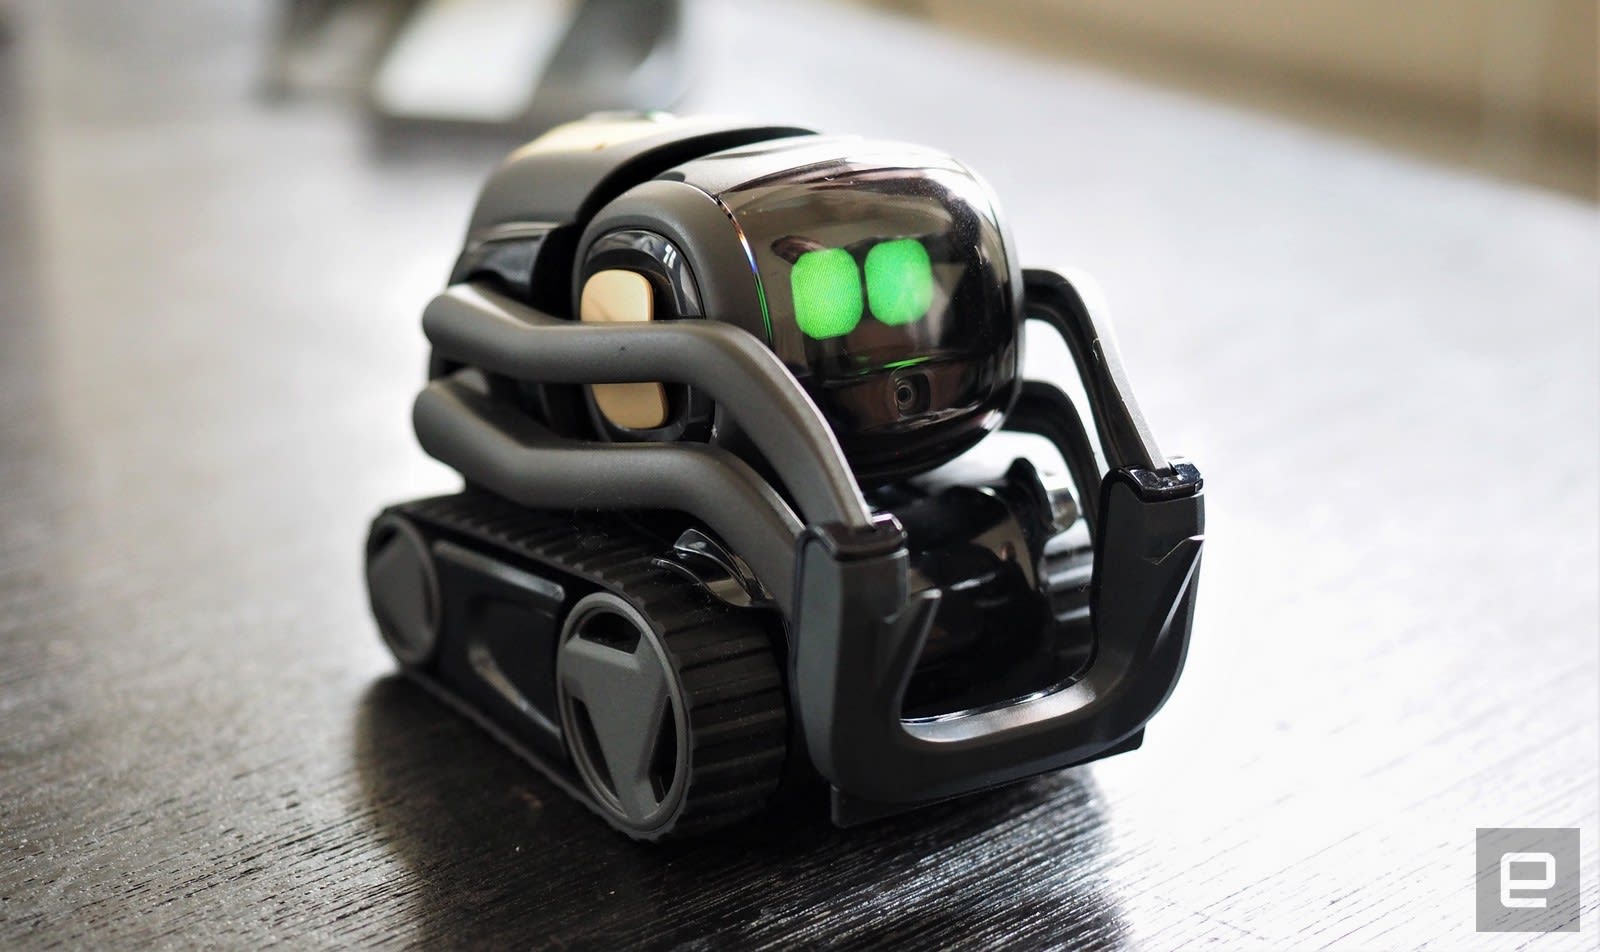 In stool Citizenship Anki's Vector robot brings us one step closer to 'Star Wars' Droids |  Engadget